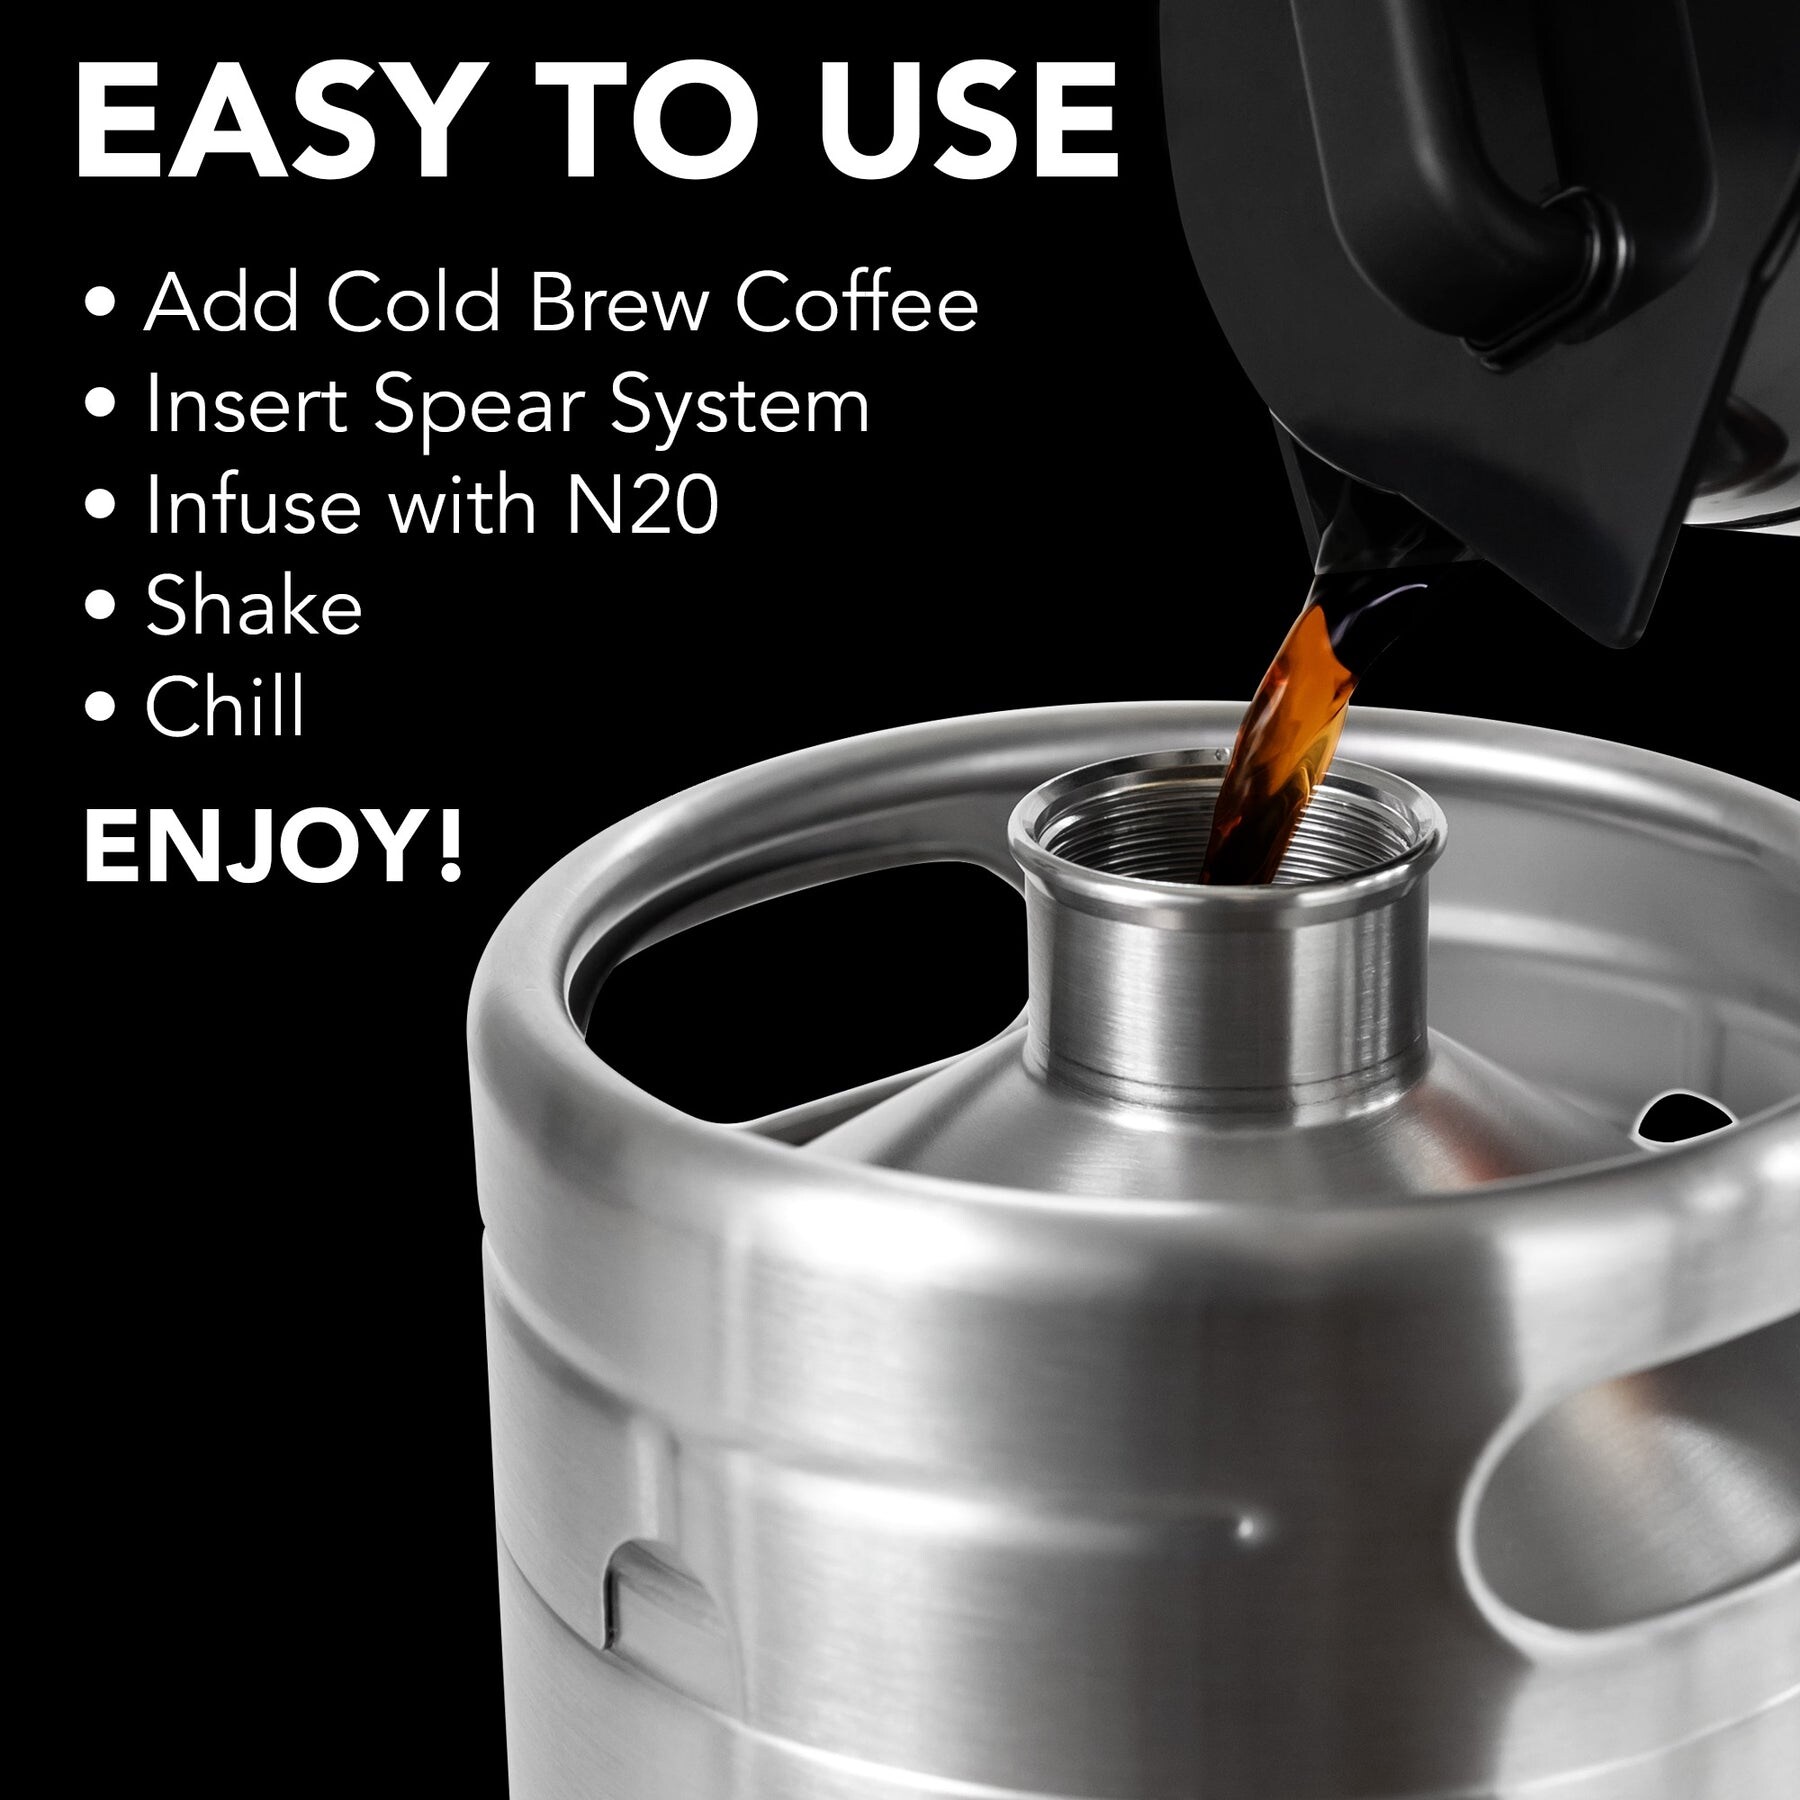 https://ak1.ostkcdn.com/images/products/is/images/direct/3efaf7e495b69086c7c50282ce392f95475ee011/Vinci-Nitro-Cold-Brew-Maker-Stainless-Steel-Home-Brew-Nitrogen-Infusion-Coffee-Keg-System-EZ-Dispensing-System-Includes-Drip-Mat.jpg